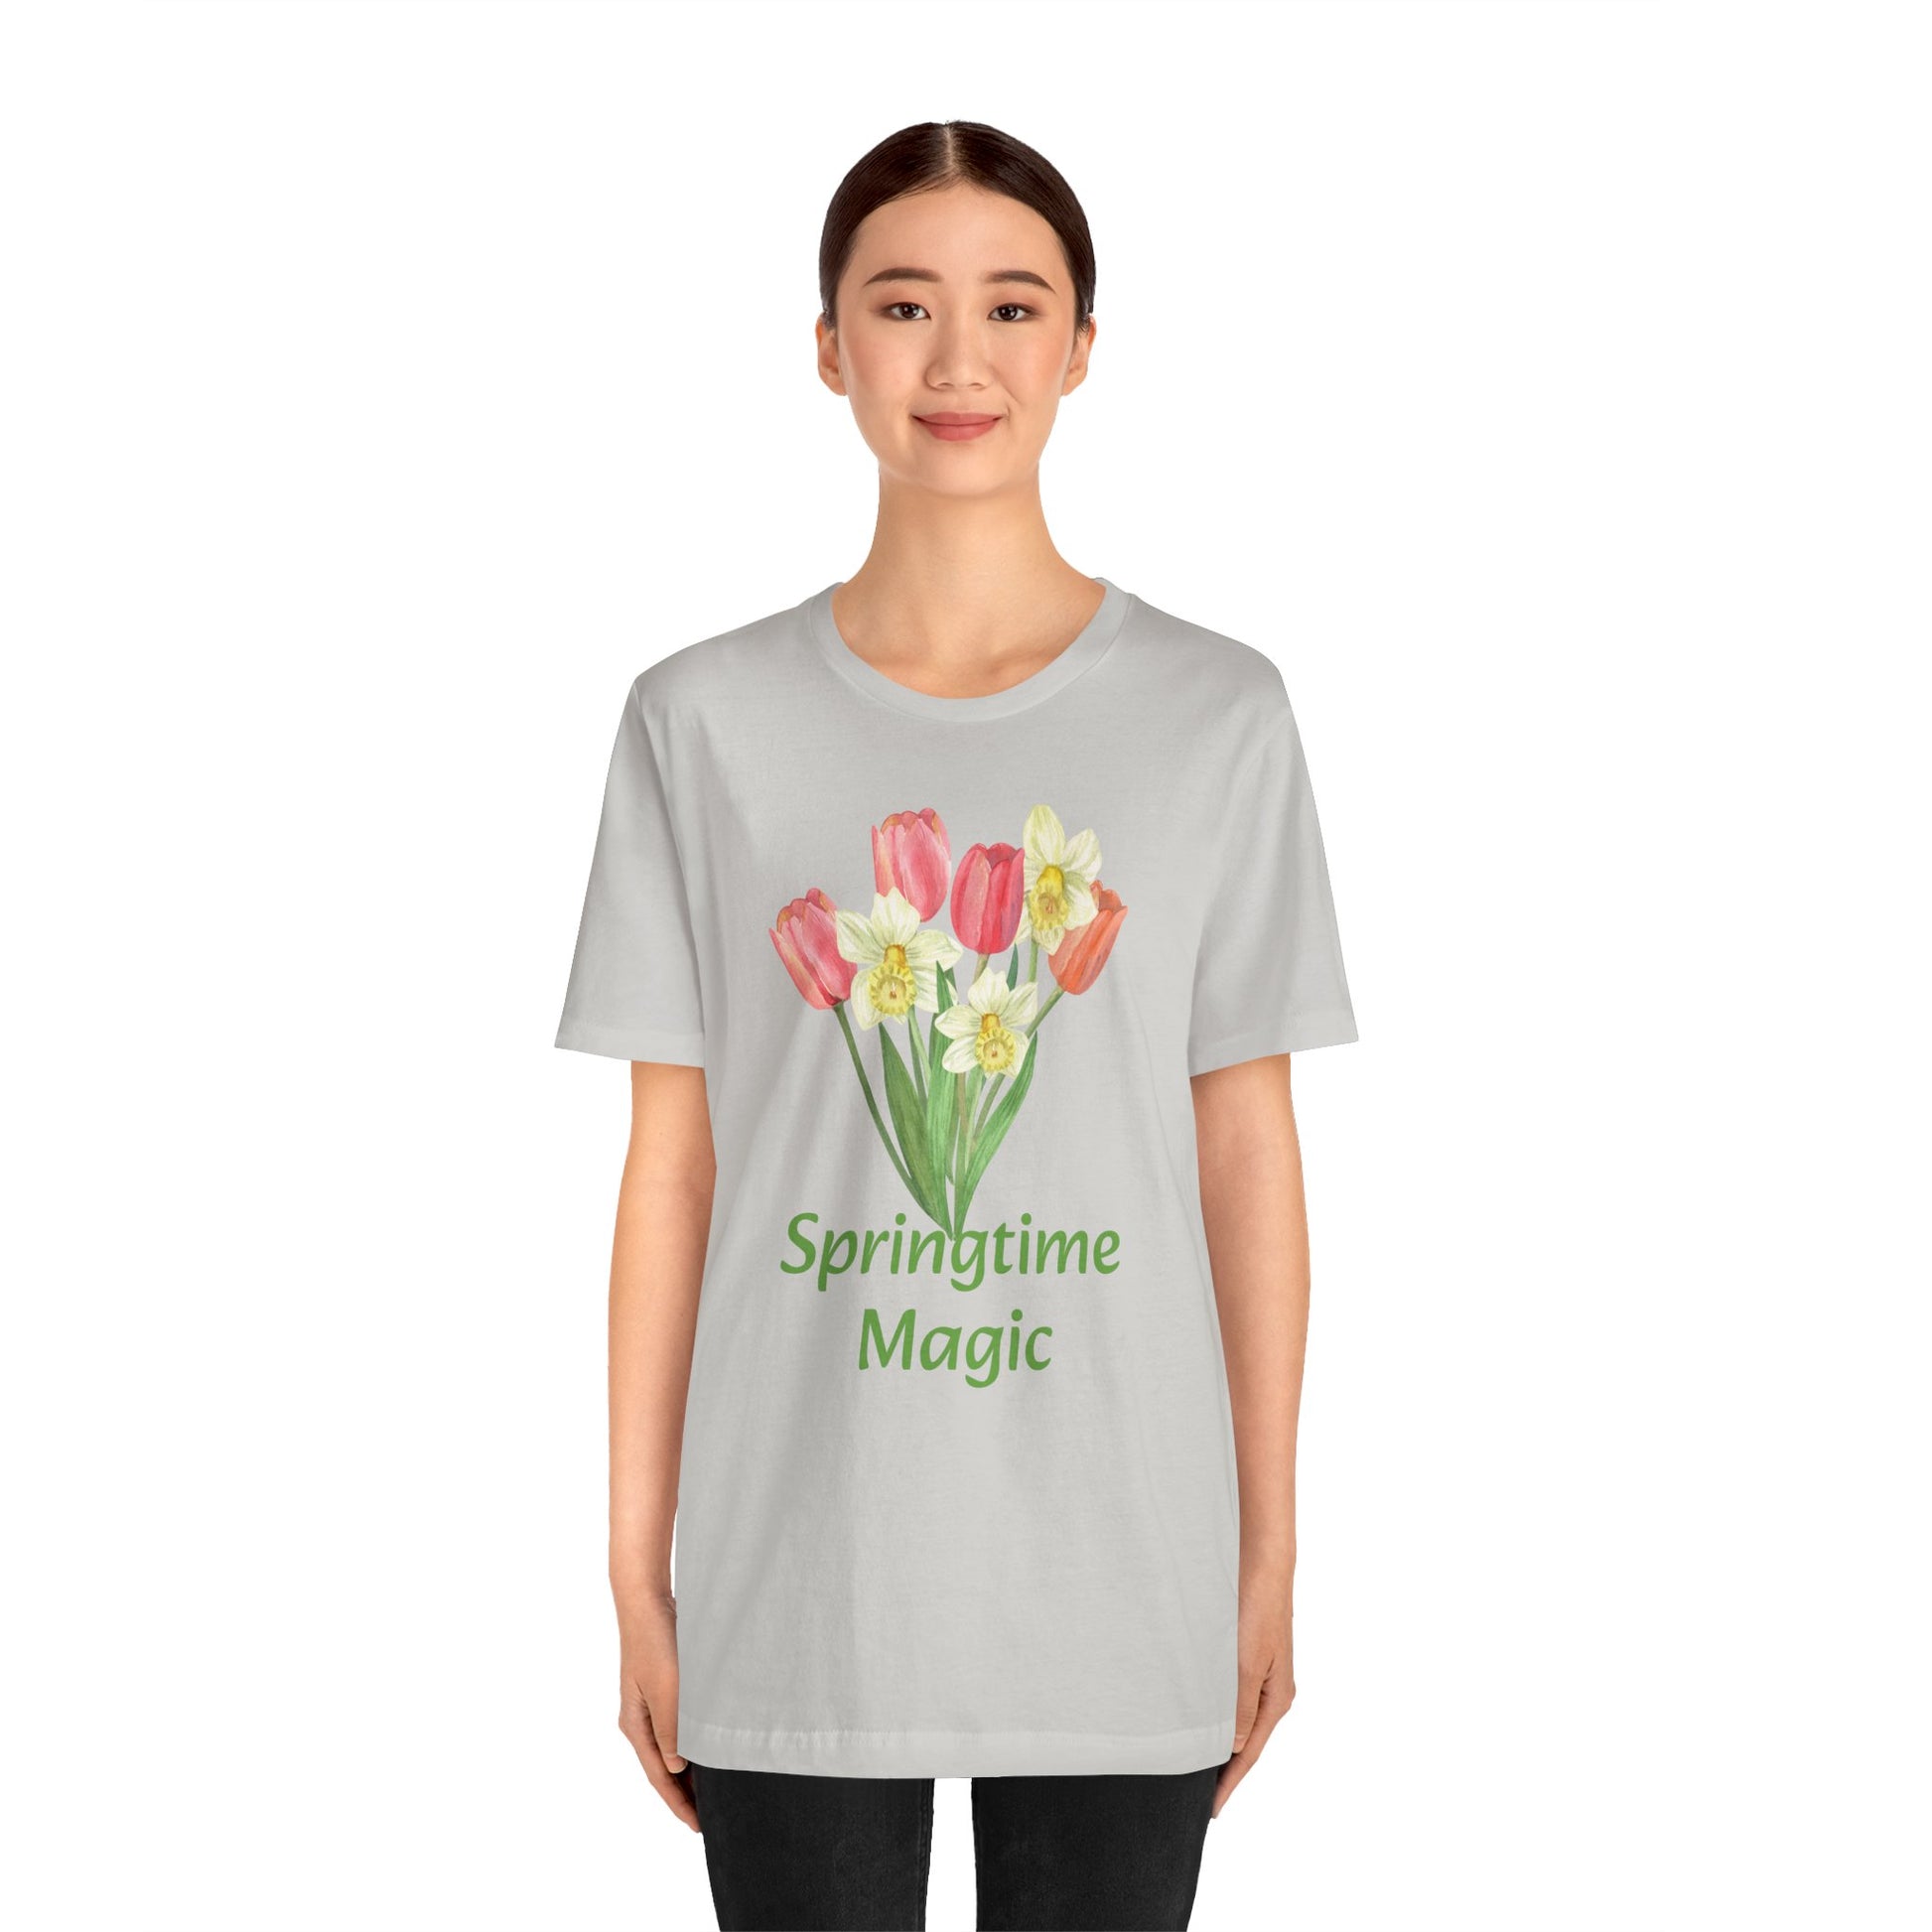 Woman wearing a gray Unisex Springtime-Magic T-shirt with a tulip design and the text "springtime magic" from Printify.